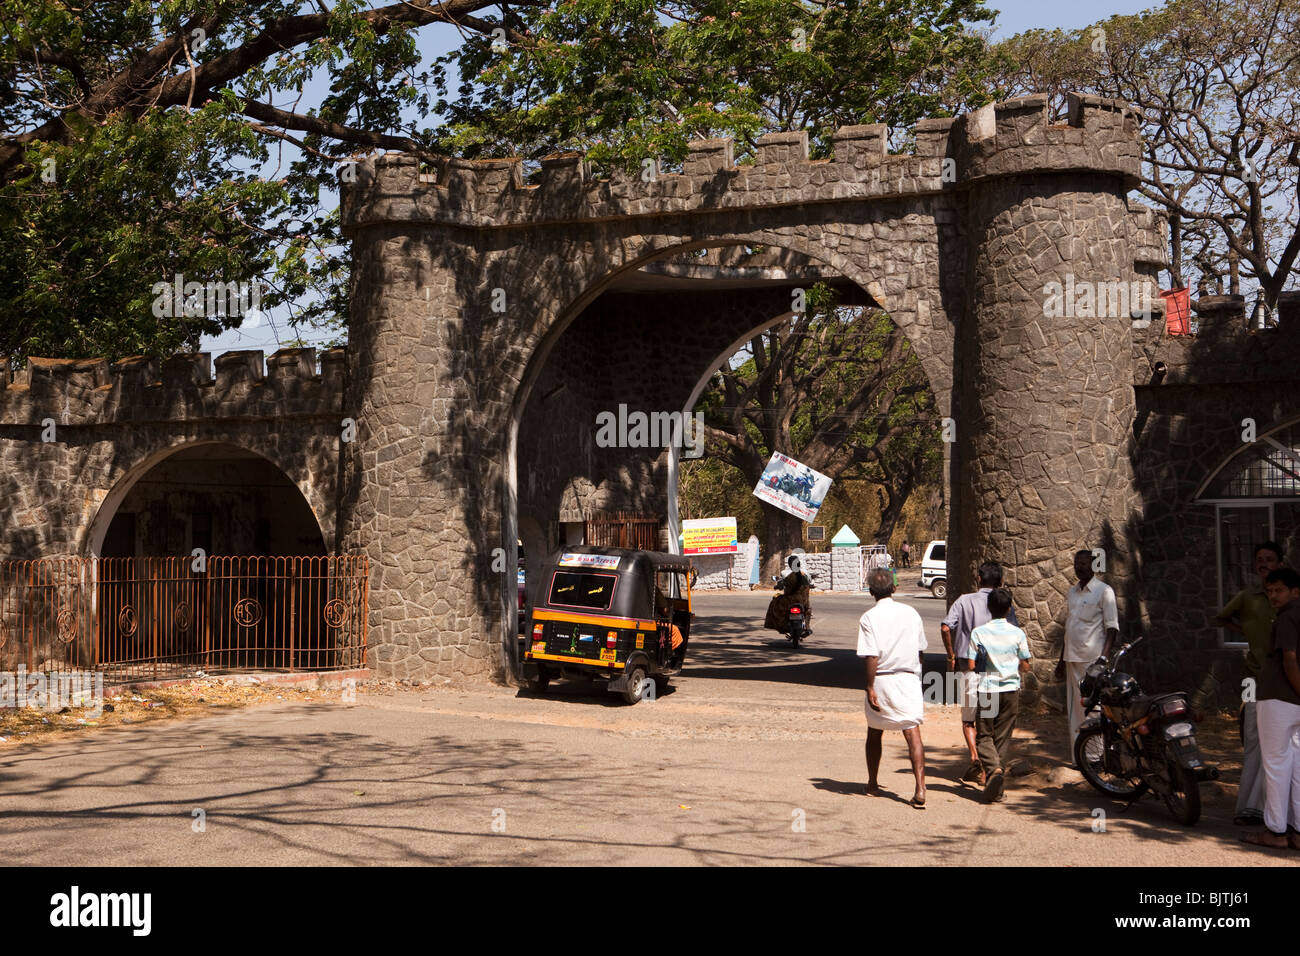 India, Kerala, Palakkad, castellated gate to fort and public parks Stock Photo